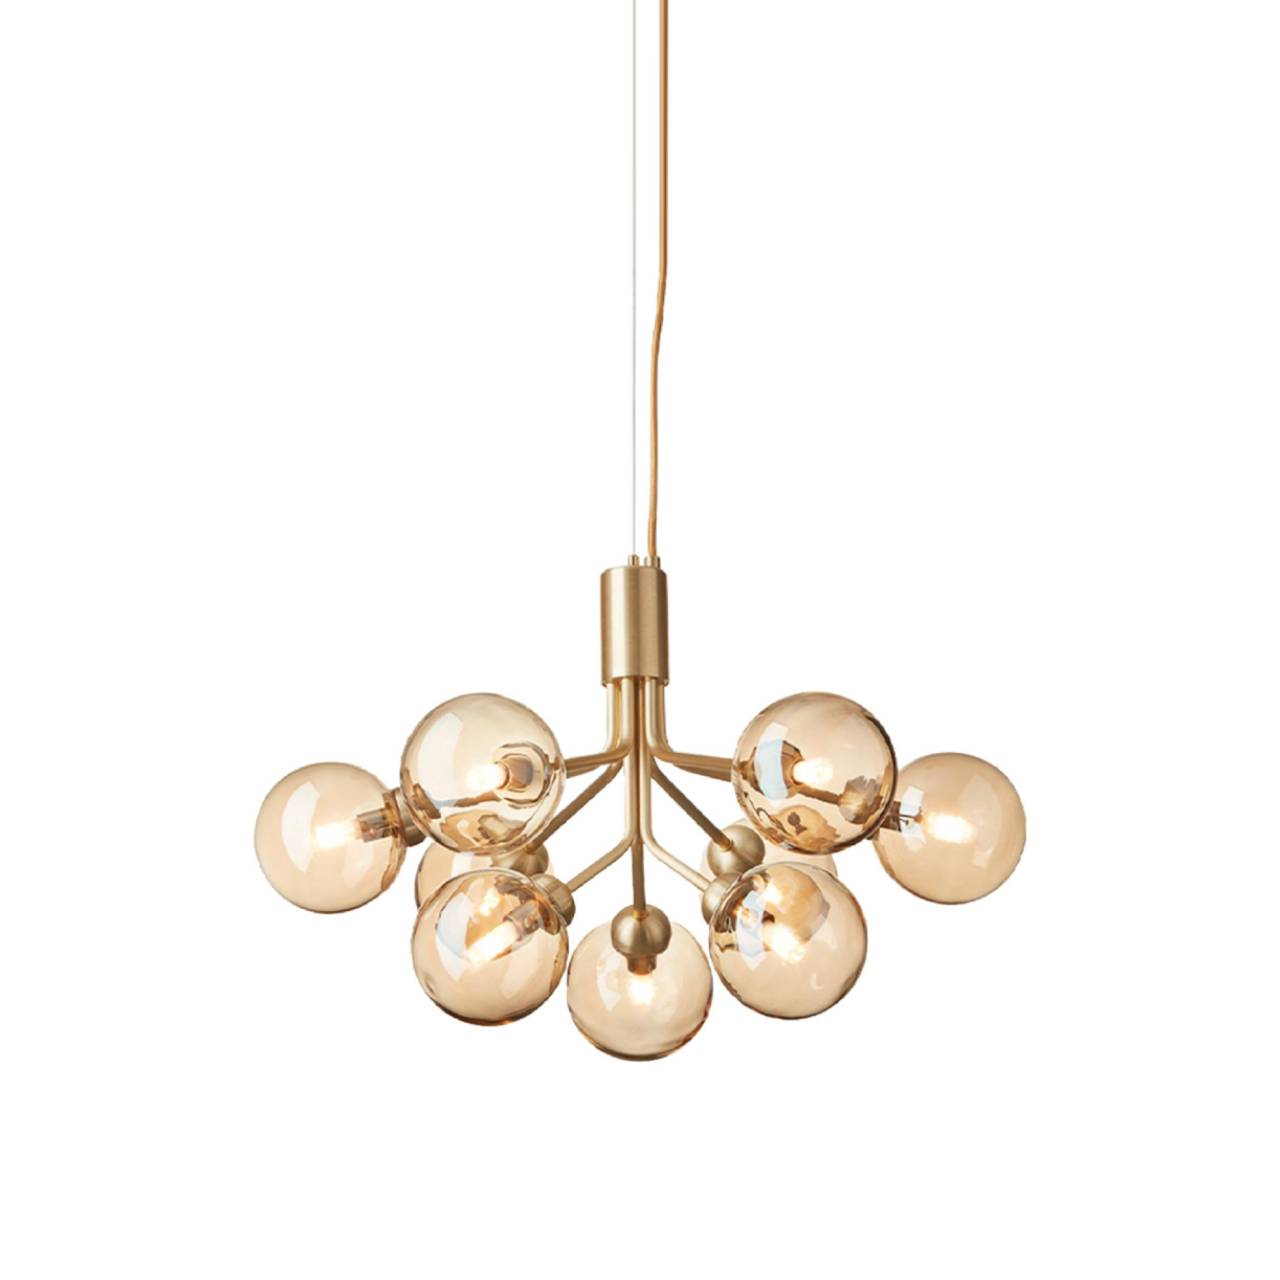 Apiales 9 Chandelier: Brushed Brass + Optic Gold + Gold